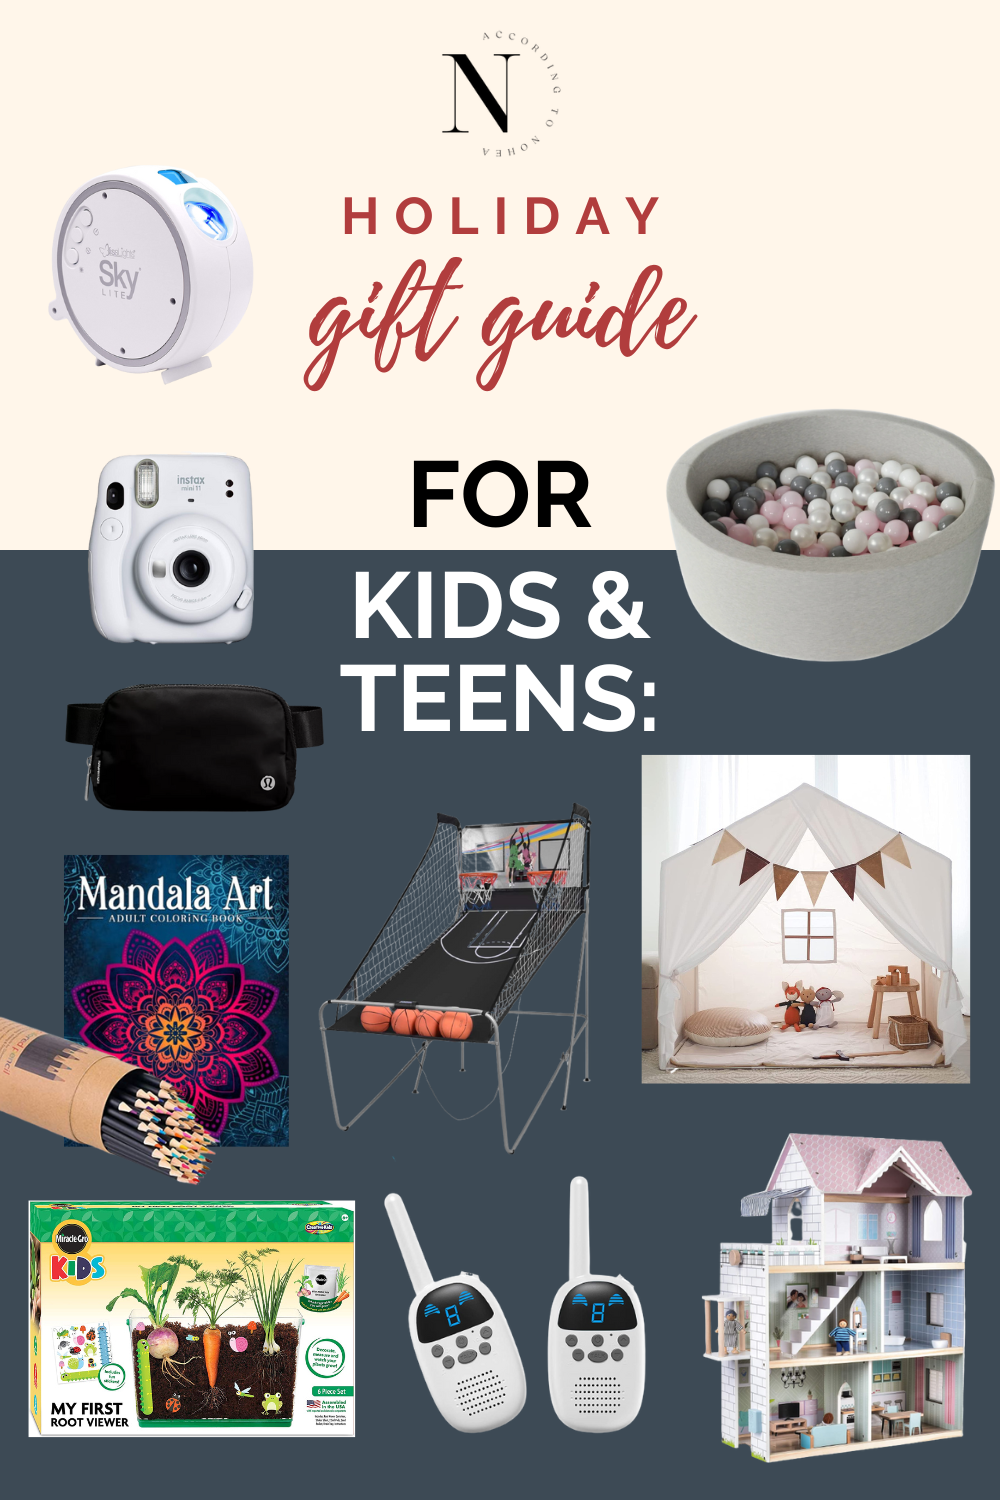 HOLIDAY GIFT GUIDE (No sizes required!) 🎁 This gift is an amazing